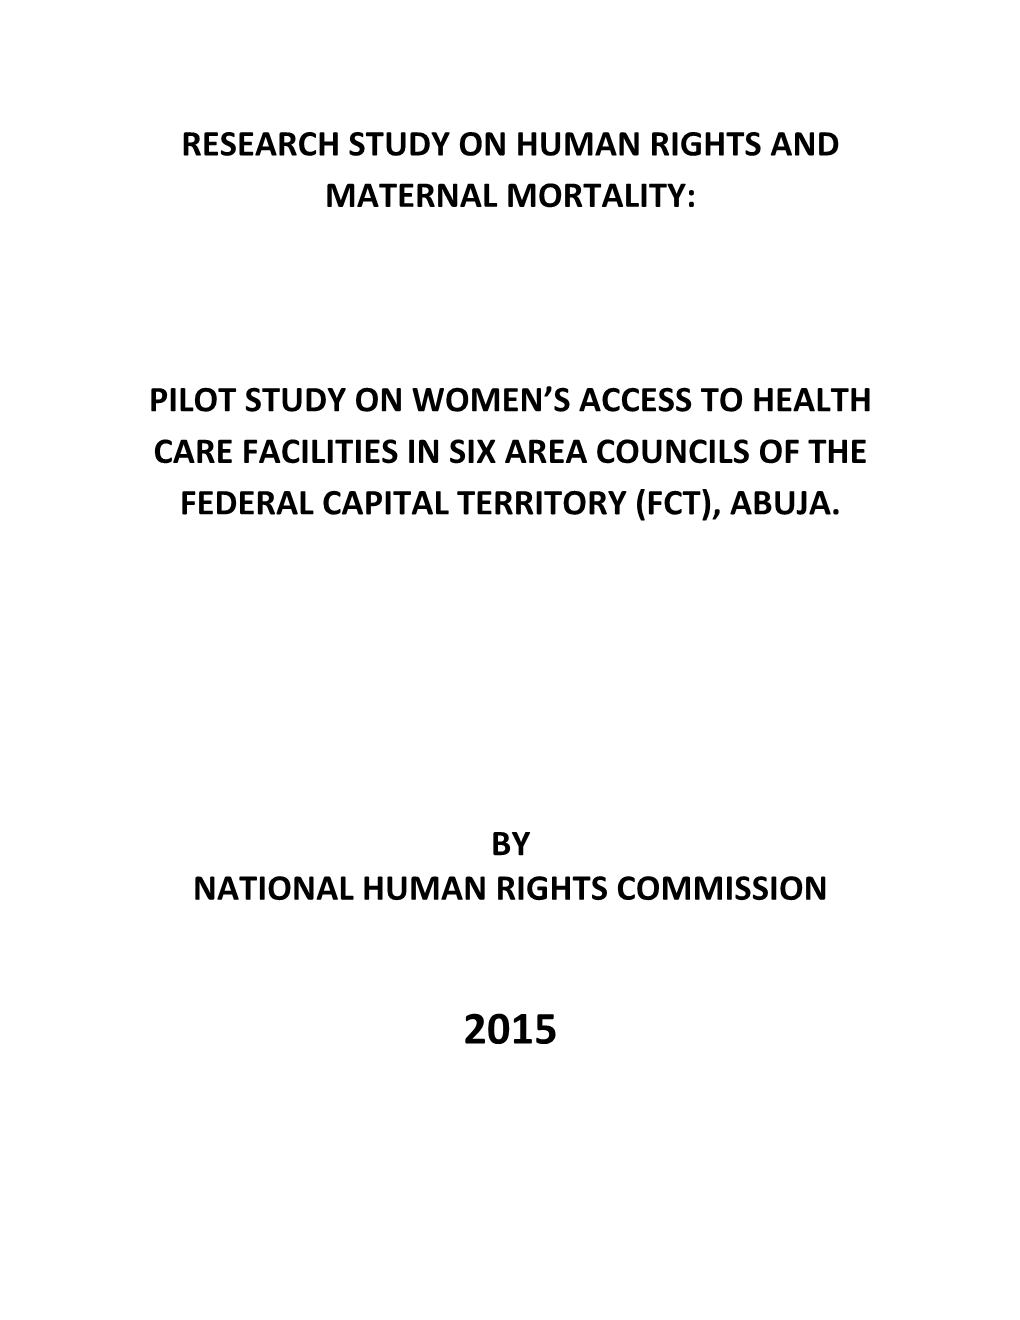 Research Study on Human Rights and Maternal Mortality